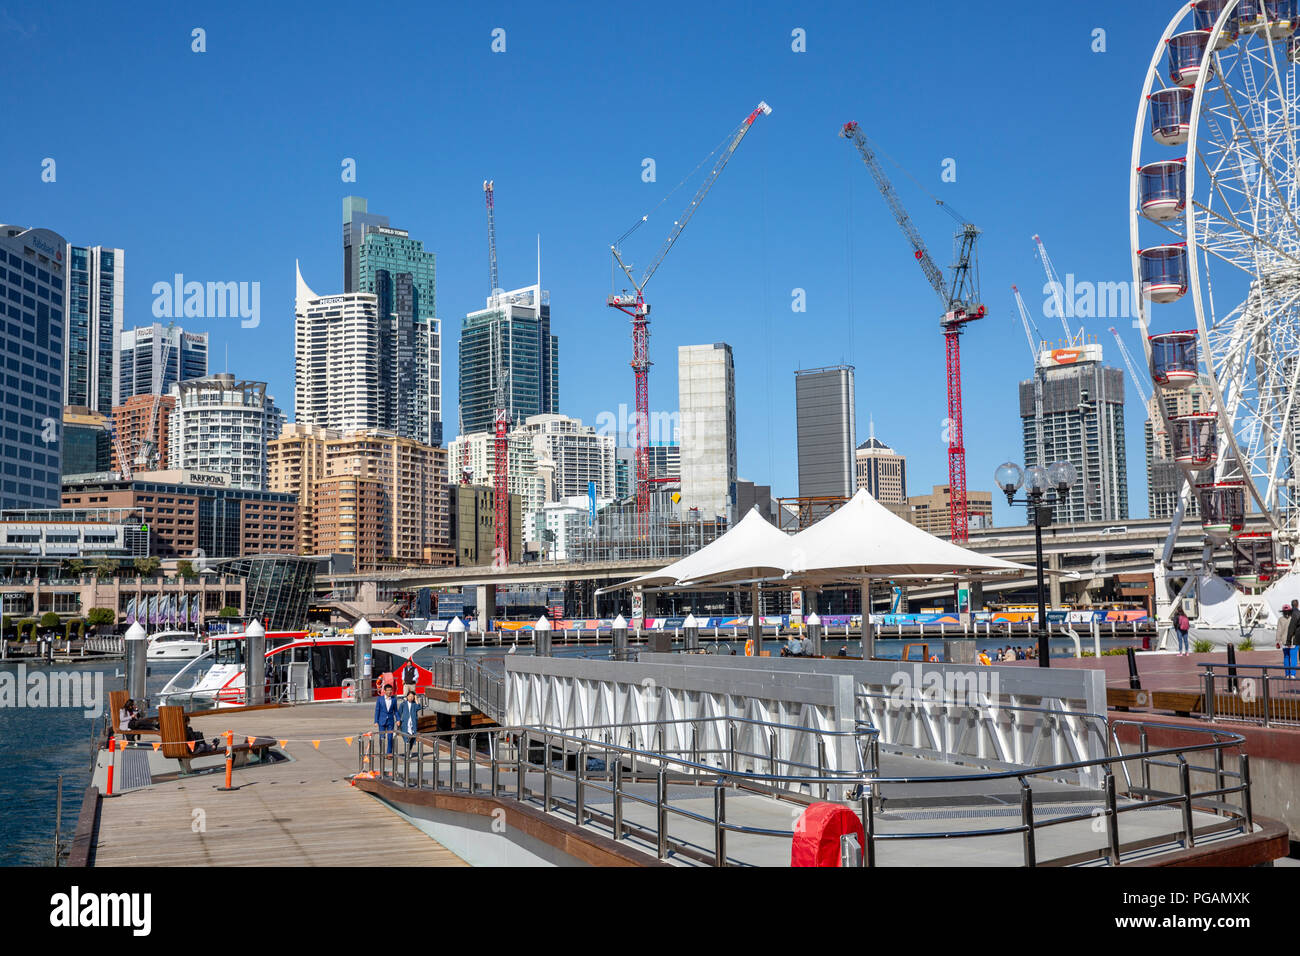 Darling harbour in Sydney city centre, with giant ferris wheel and development work underway,Sydney,New South Wales,Australia Stock Photo